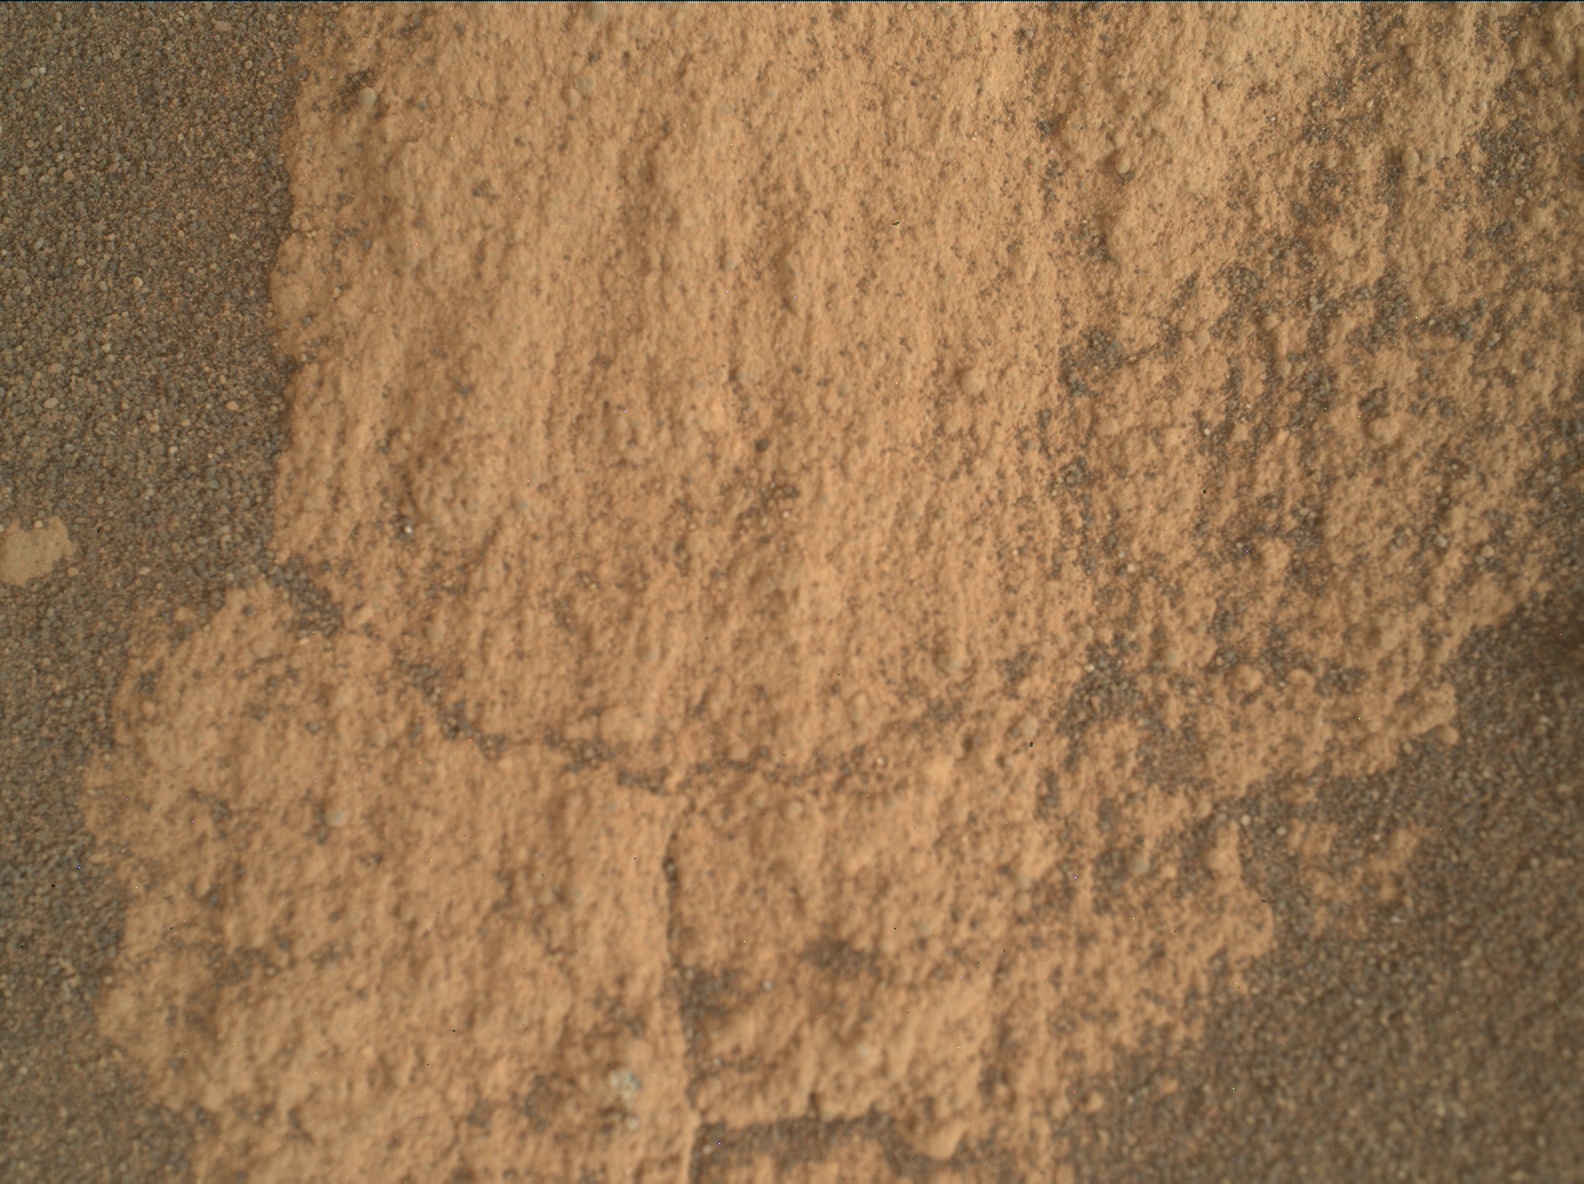 Nasa's Mars rover Curiosity acquired this image using its Mars Hand Lens Imager (MAHLI) on Sol 2694